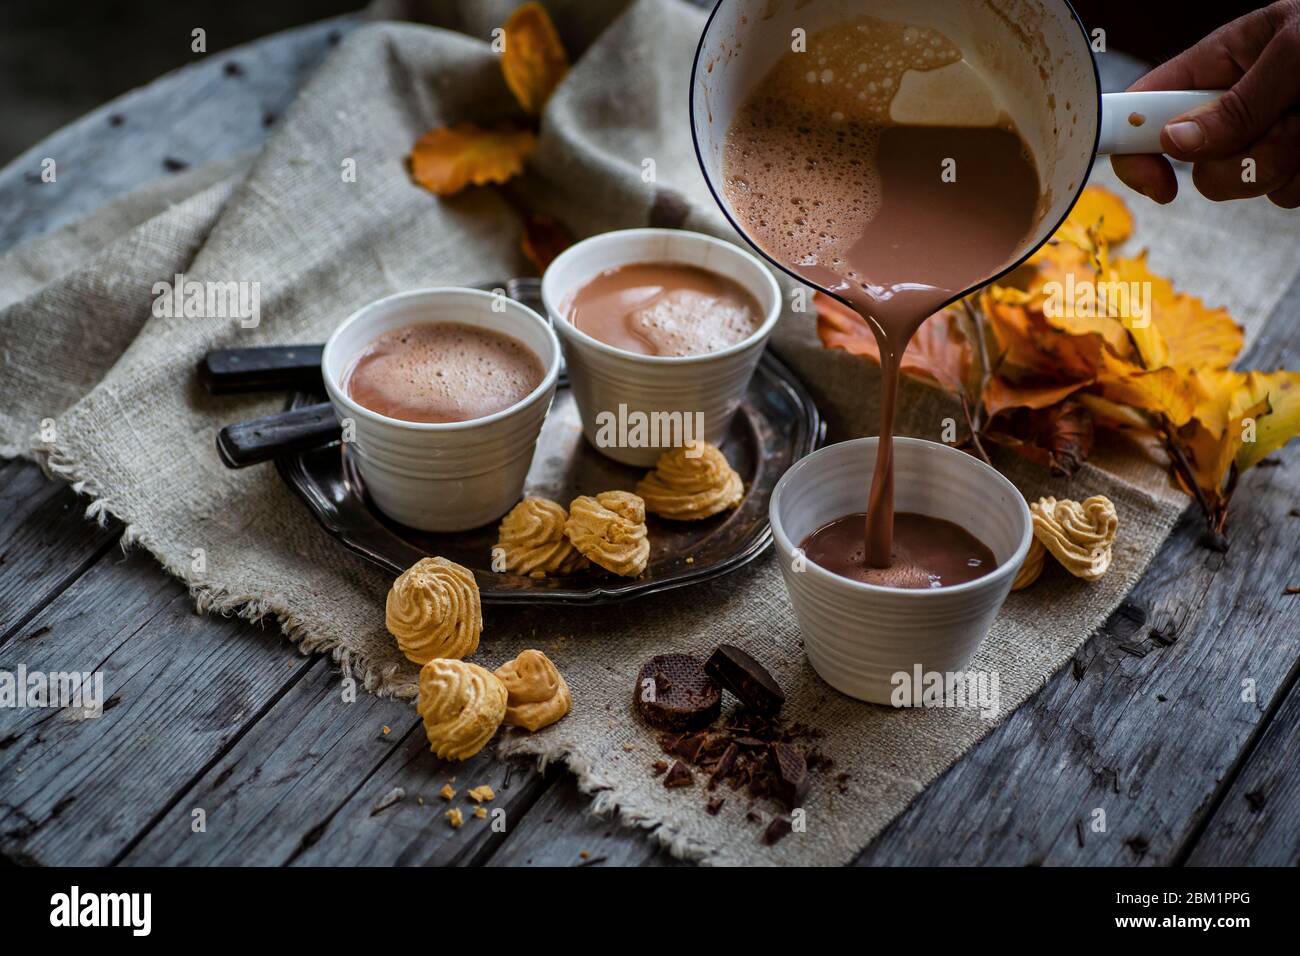 Hot chocolate is pouring from pan to a cup. Tasty setup with cups and hot chocolate and autumn colors. Stock Photo